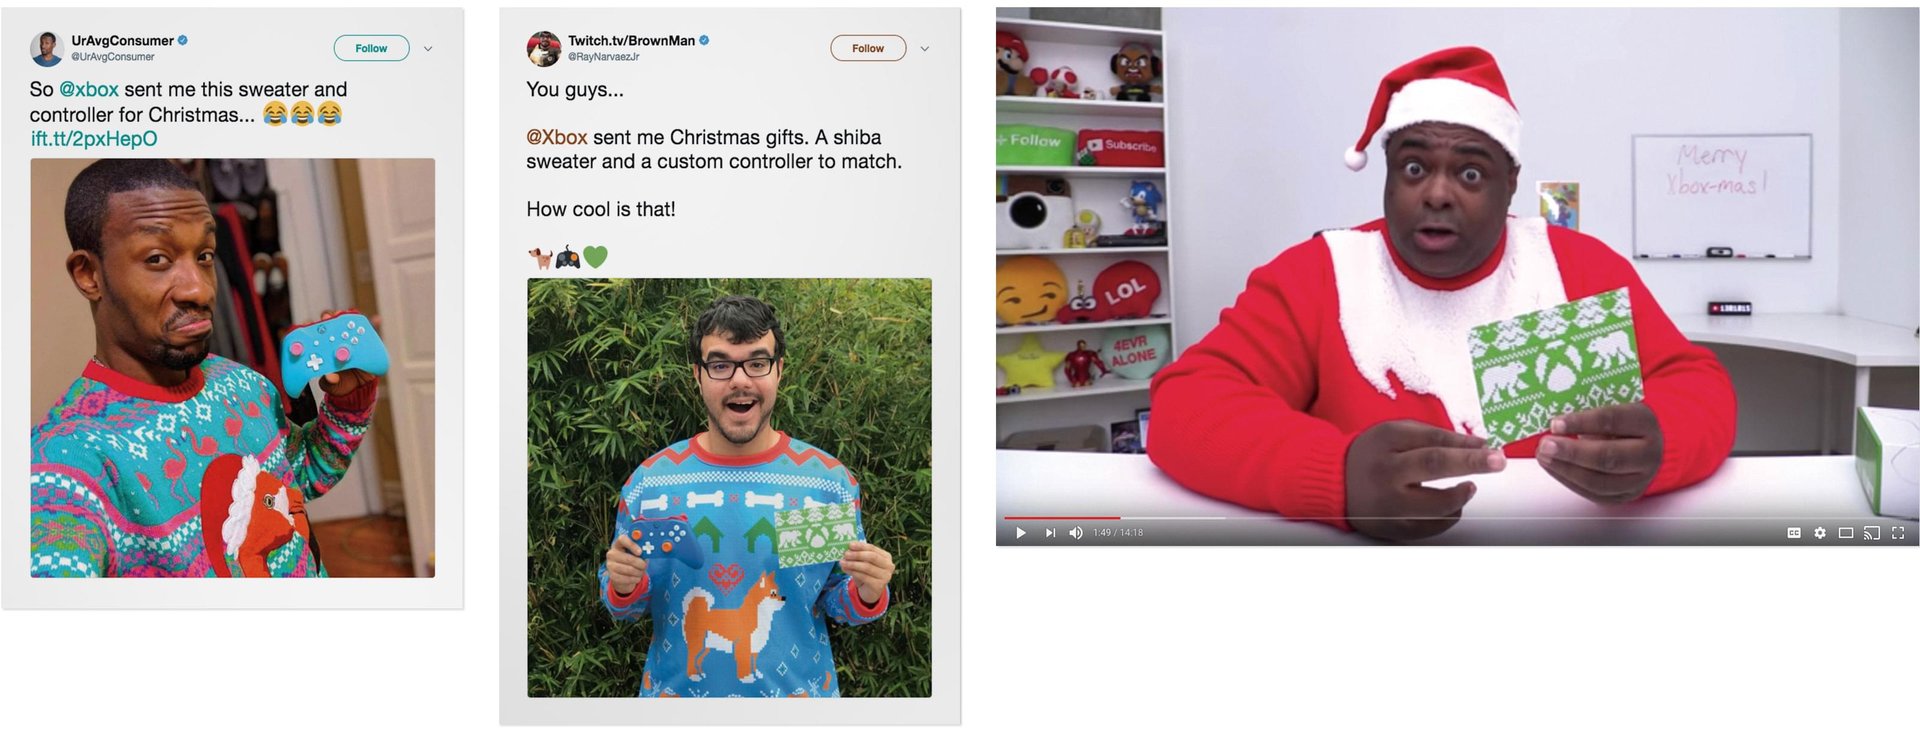 Xbox Influencers Shared Their Gifts on YouTube, Instagram and Twitter